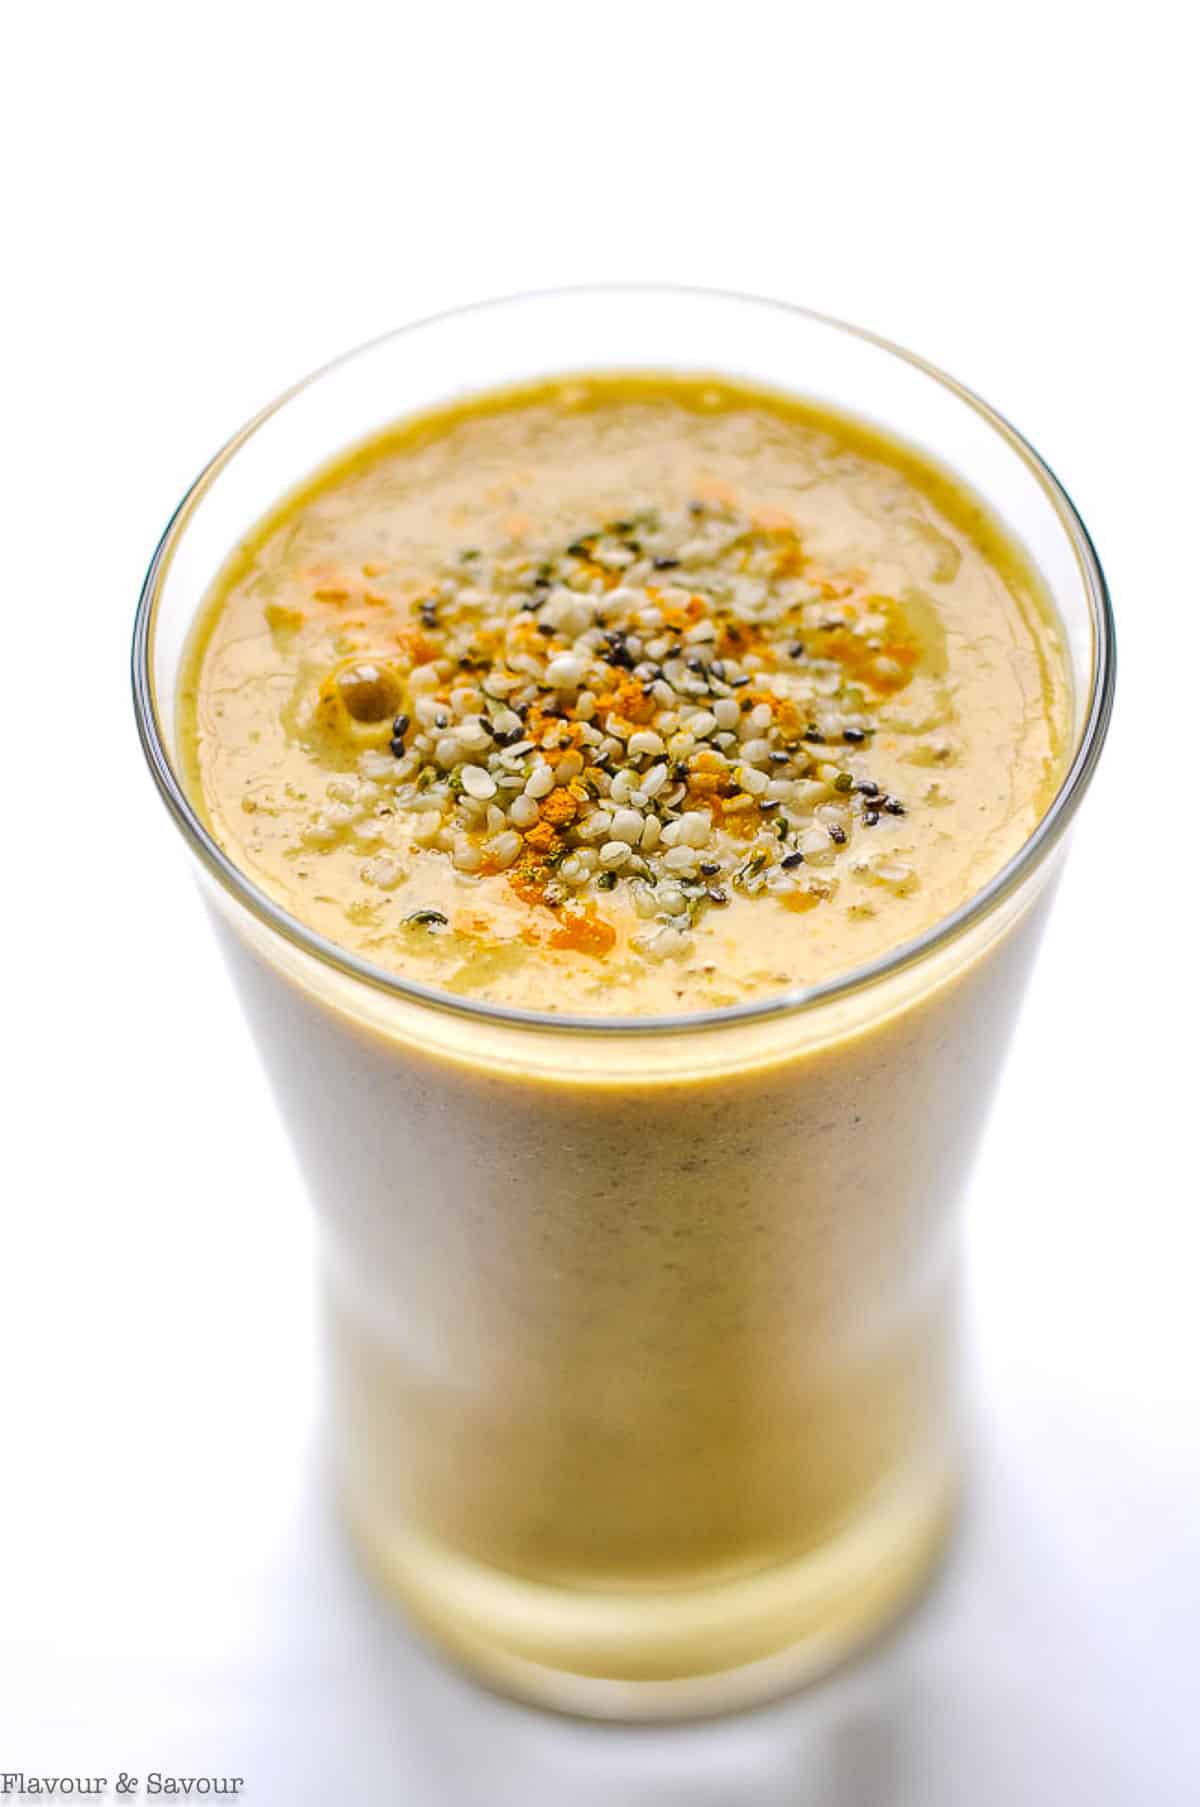 Tropical Turmeric Smoothie garnished with hemp and chia seeds